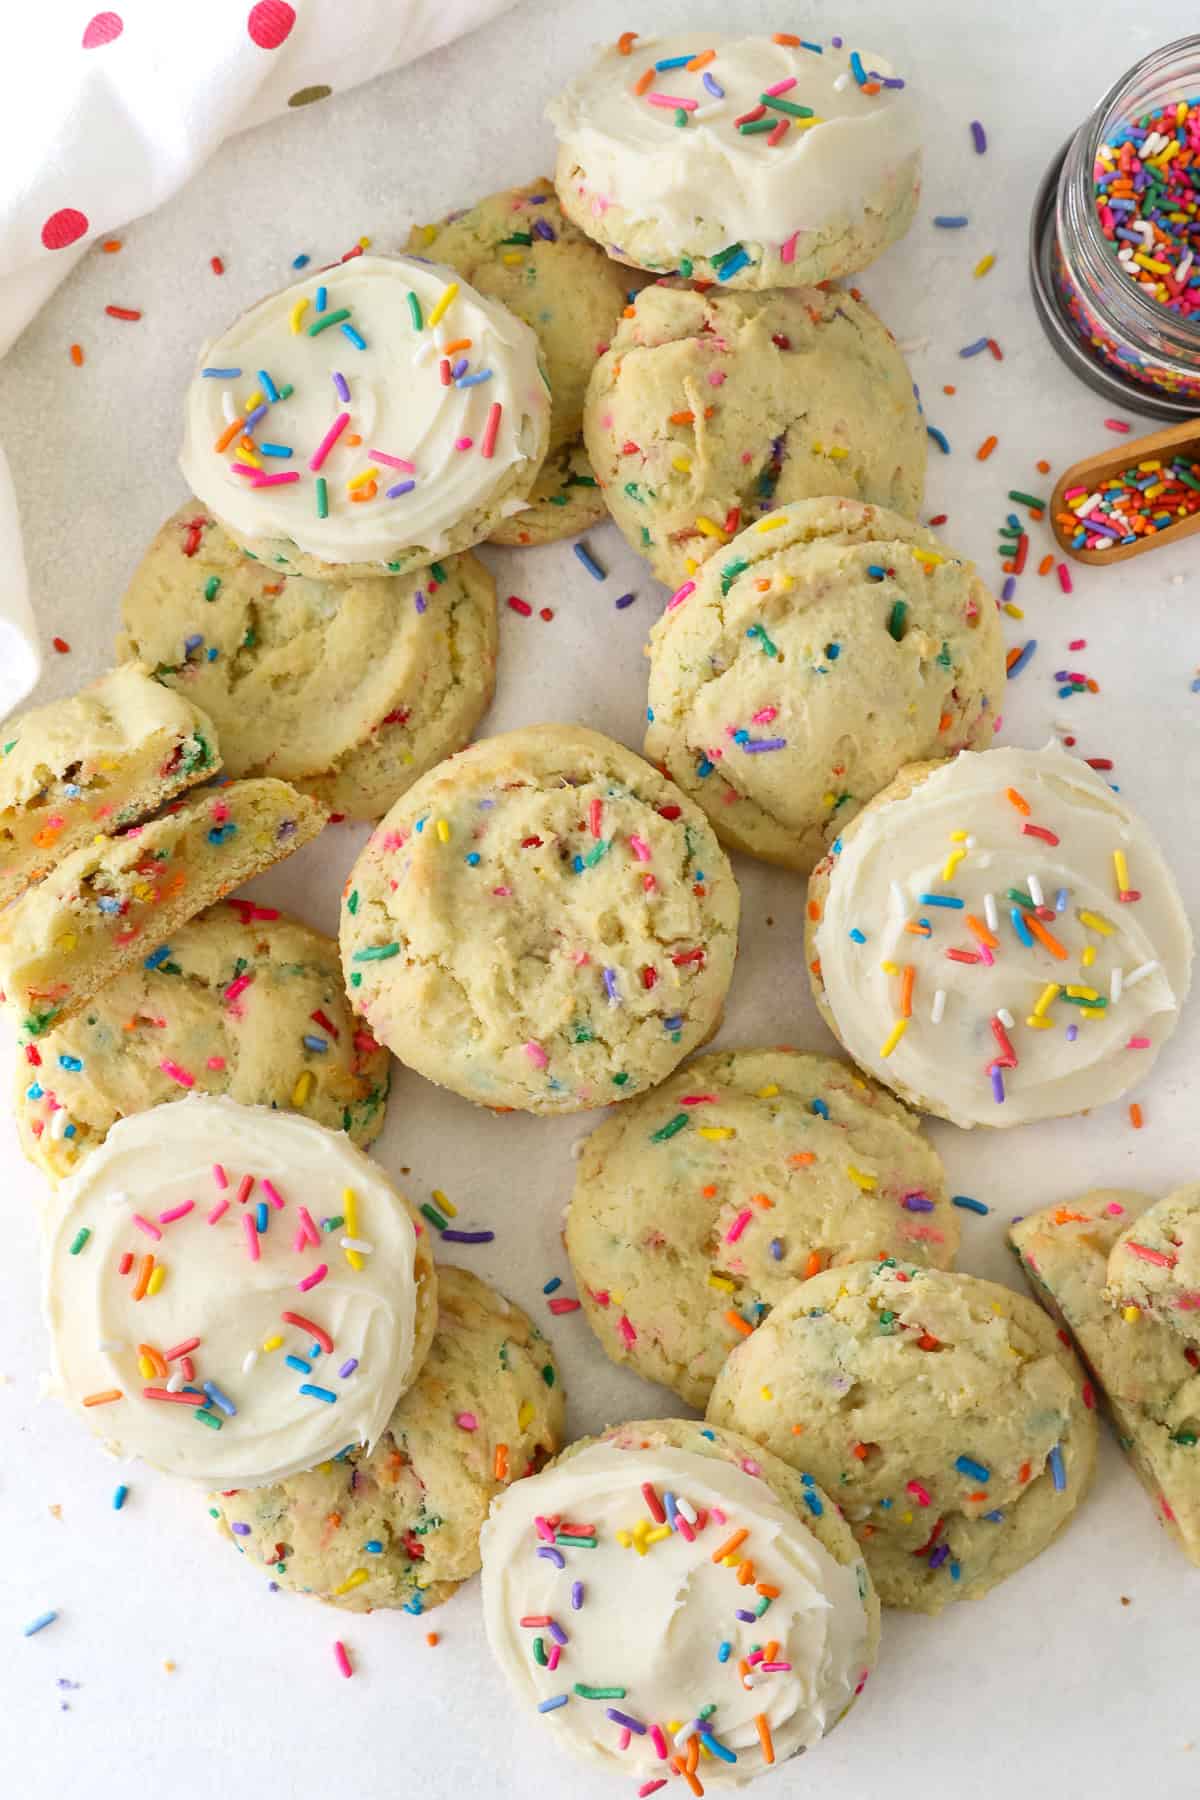 Overhead view of assorted funfetti cake mix cookies, some frosted and decorated with sprinkles.